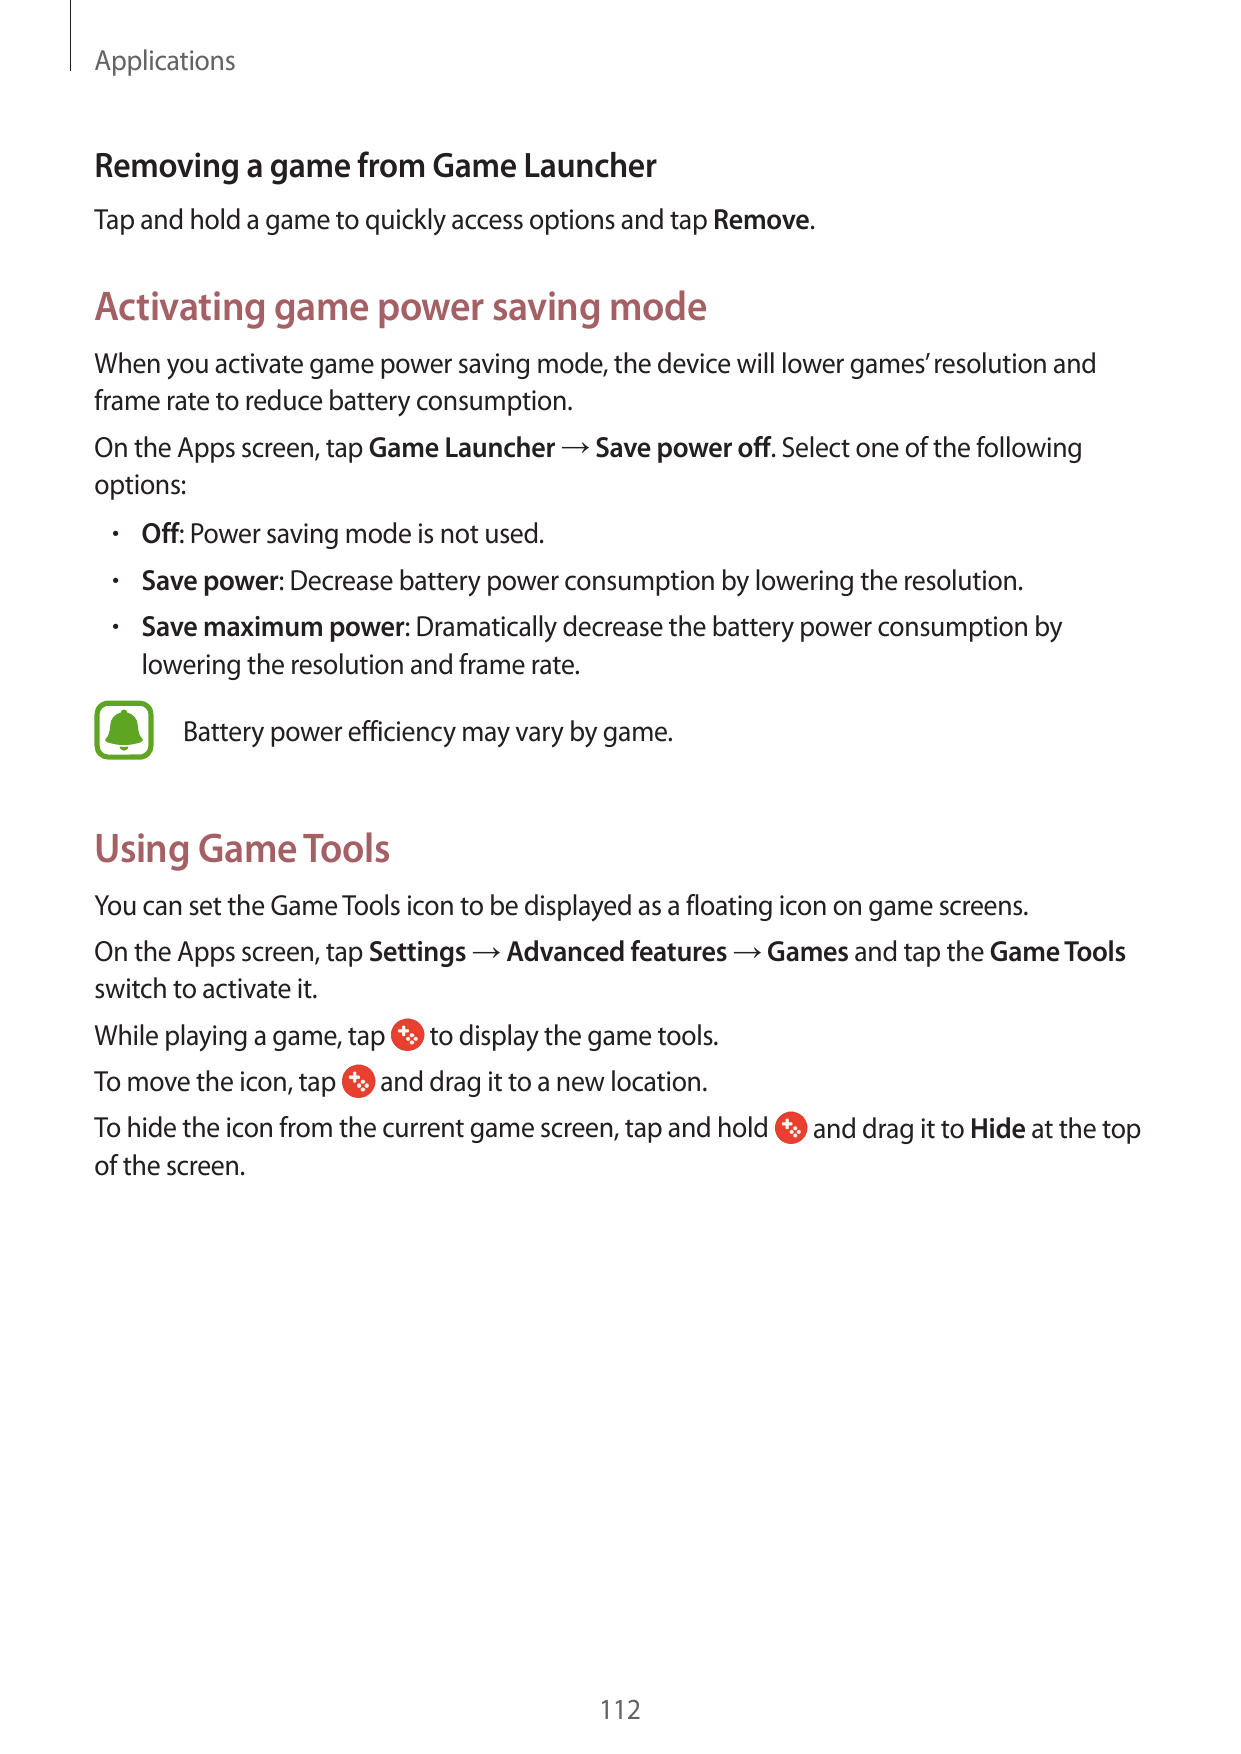 ApplicationsRemoving a game from Game LauncherTap and hold a game to quickly access options and tap Remove.Activating game power